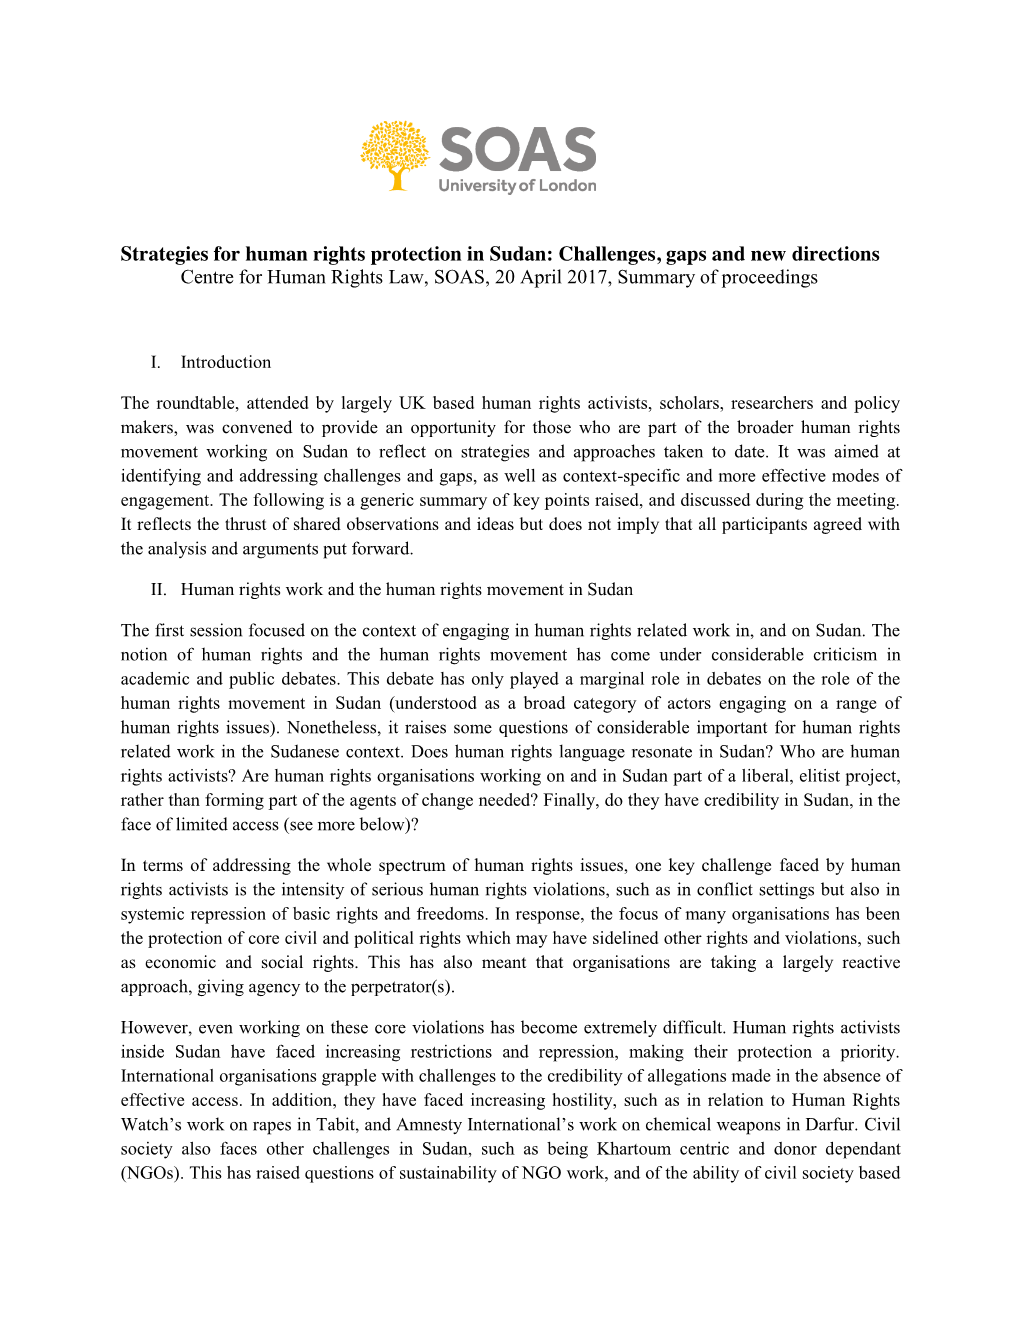 Strategies for Human Rights Protection in Sudan: Challenges, Gaps and New Directions Centre for Human Rights Law, SOAS, 20 April 2017, Summary of Proceedings